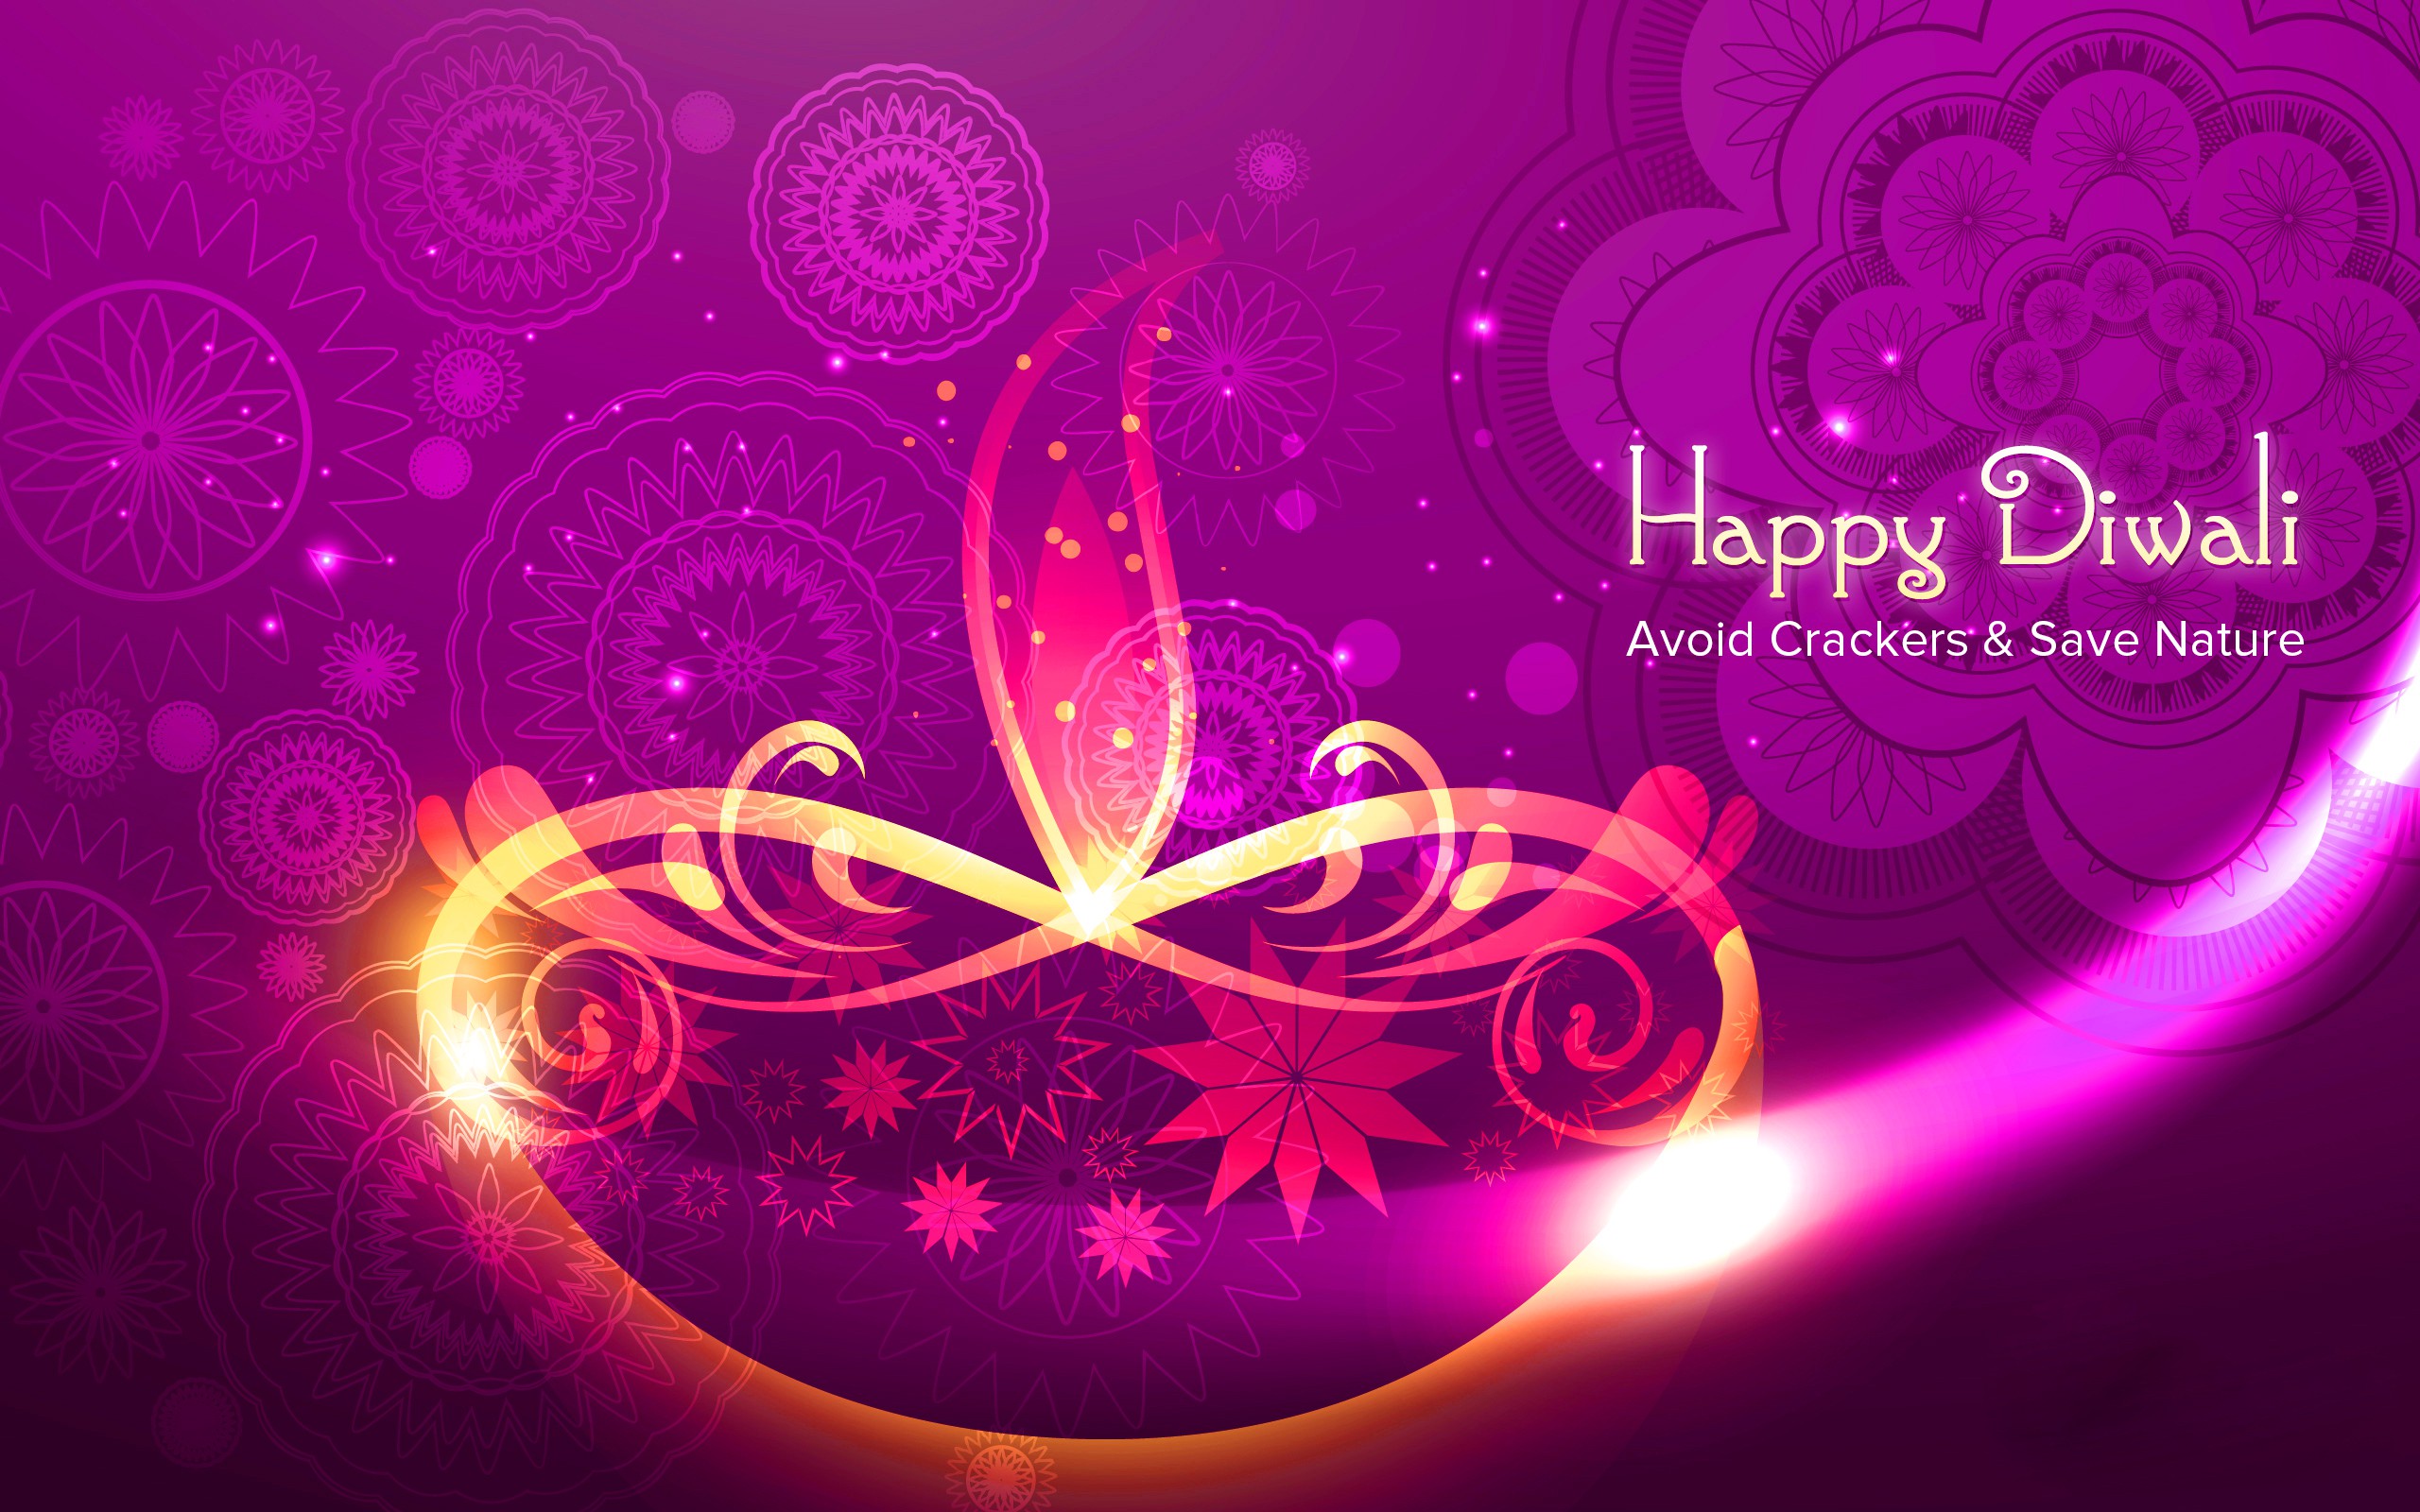 Avoid Crackers Happy Diwali Inspiring Wishes High Definition - Unique Happy Diwali Wishes - HD Wallpaper 